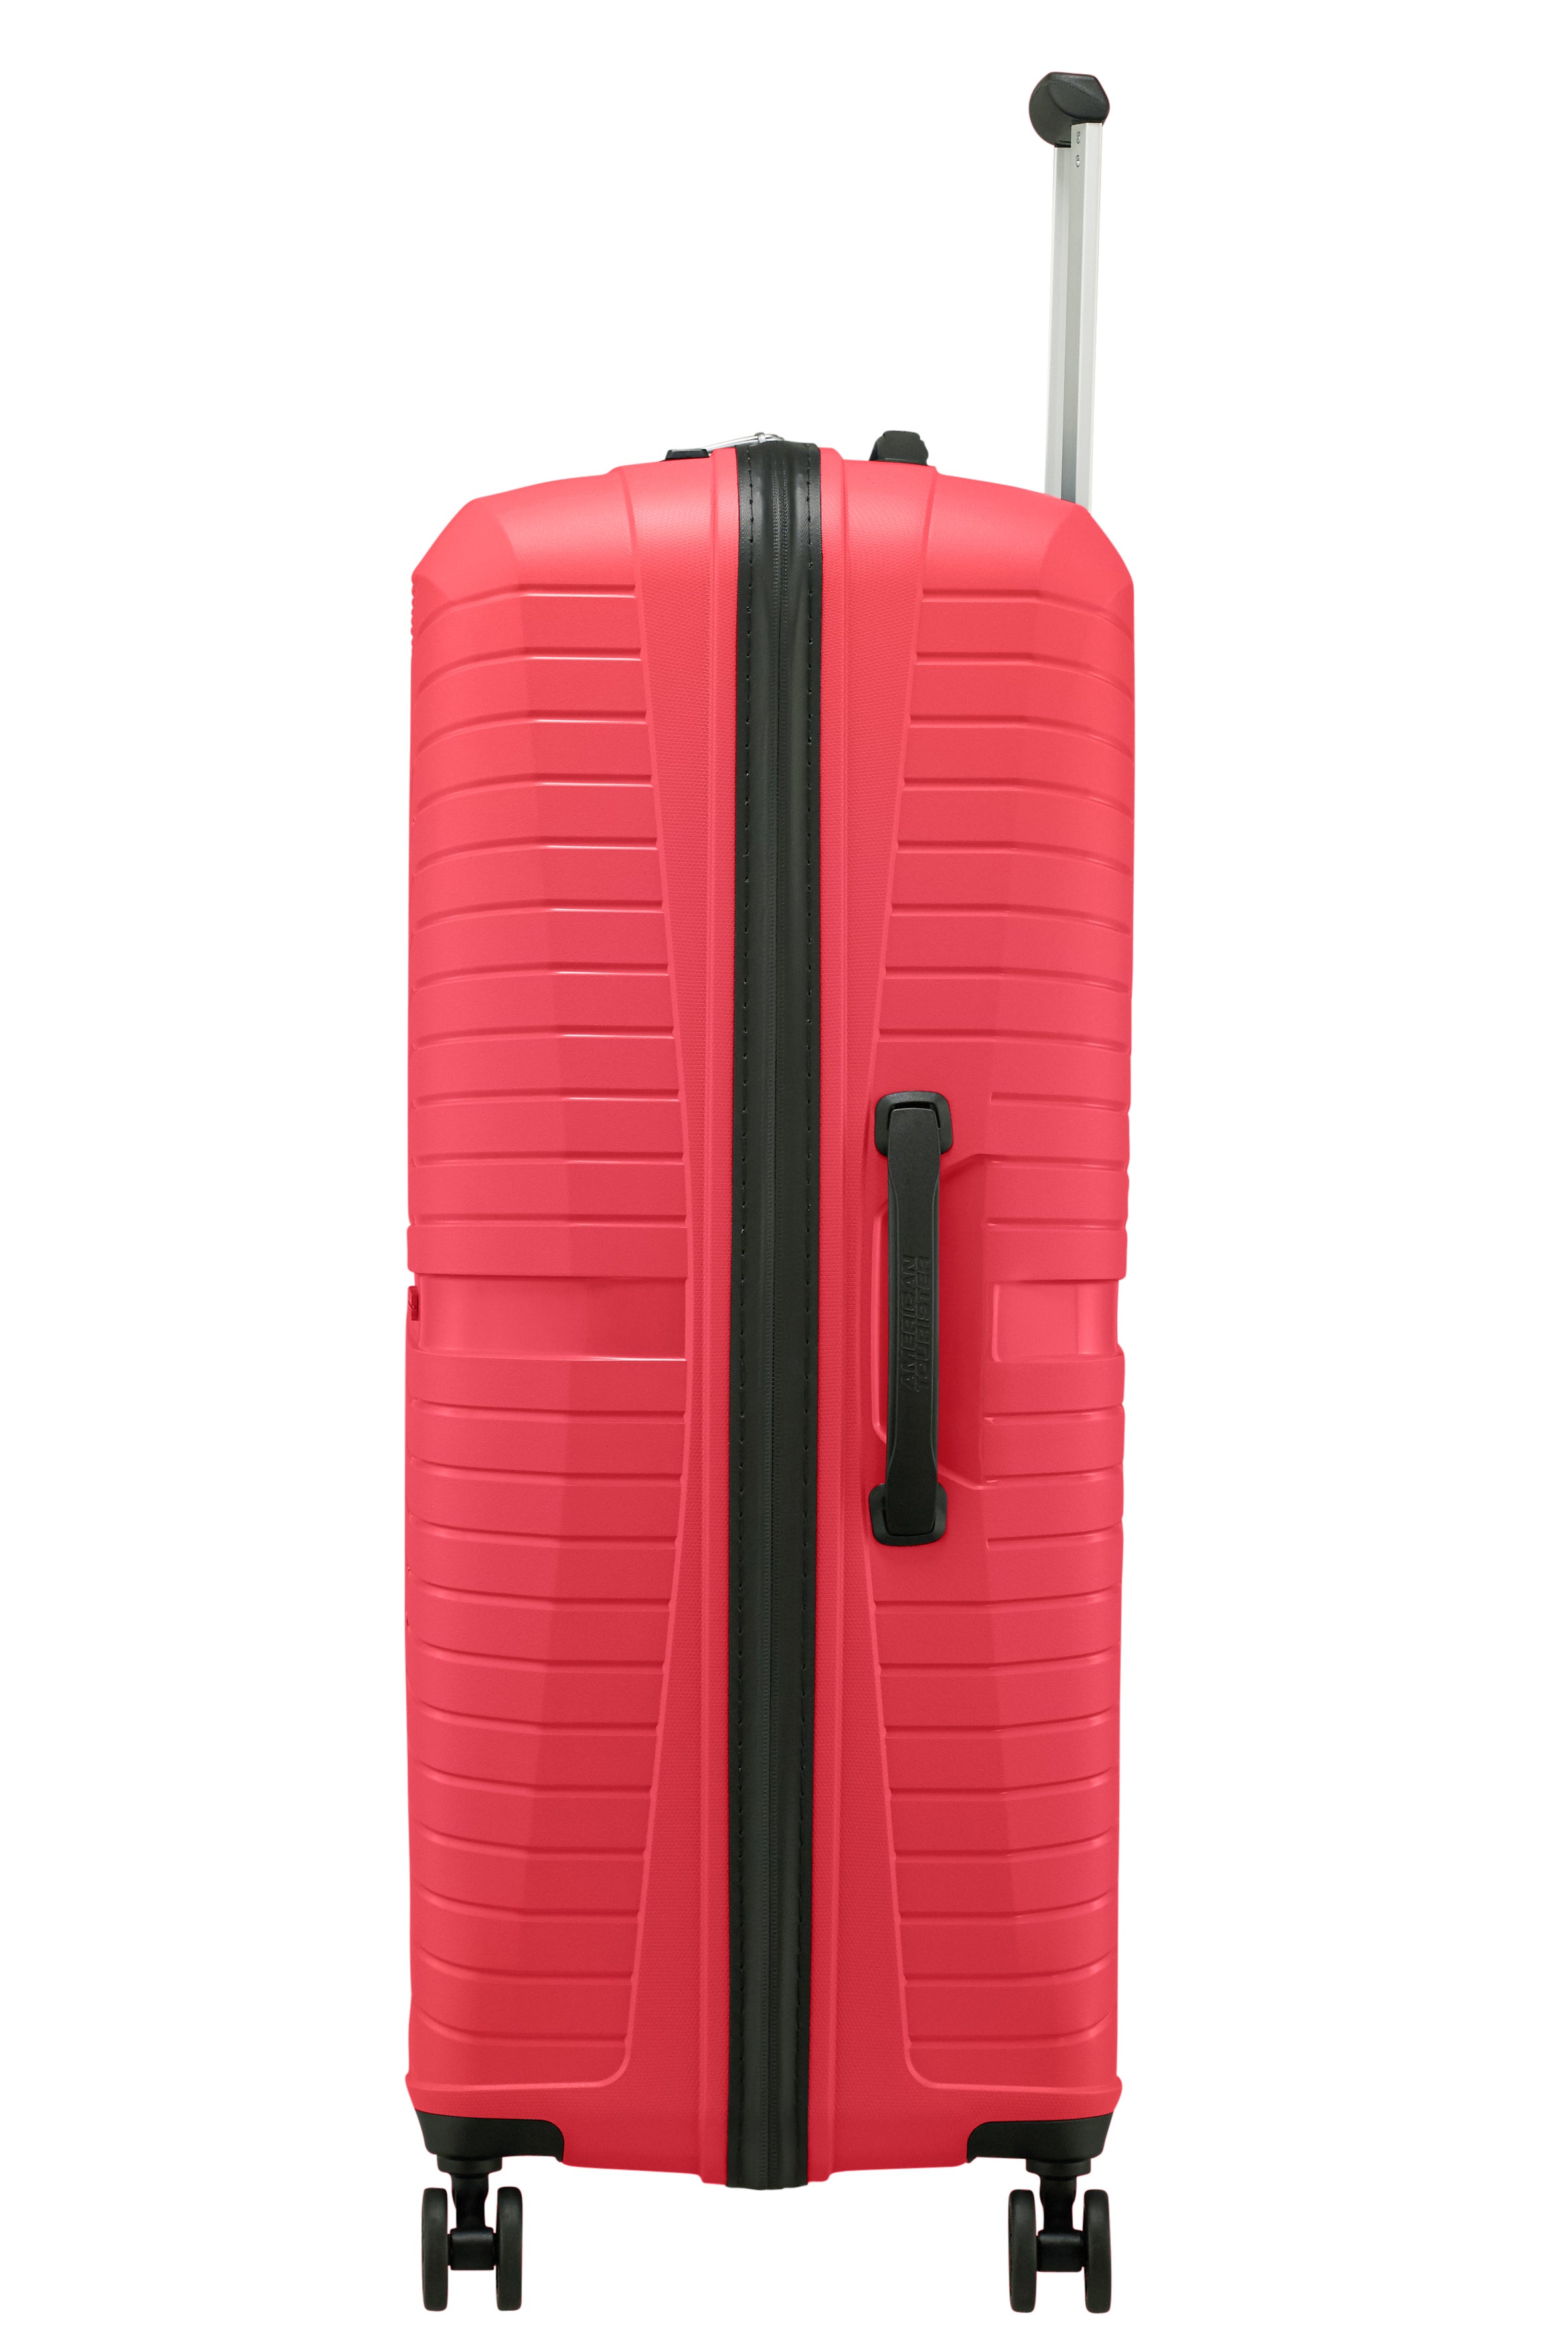 American Tourister - Airconic 77cm Large 4 Wheel Hard Suitcase - Paradise Pink - 0